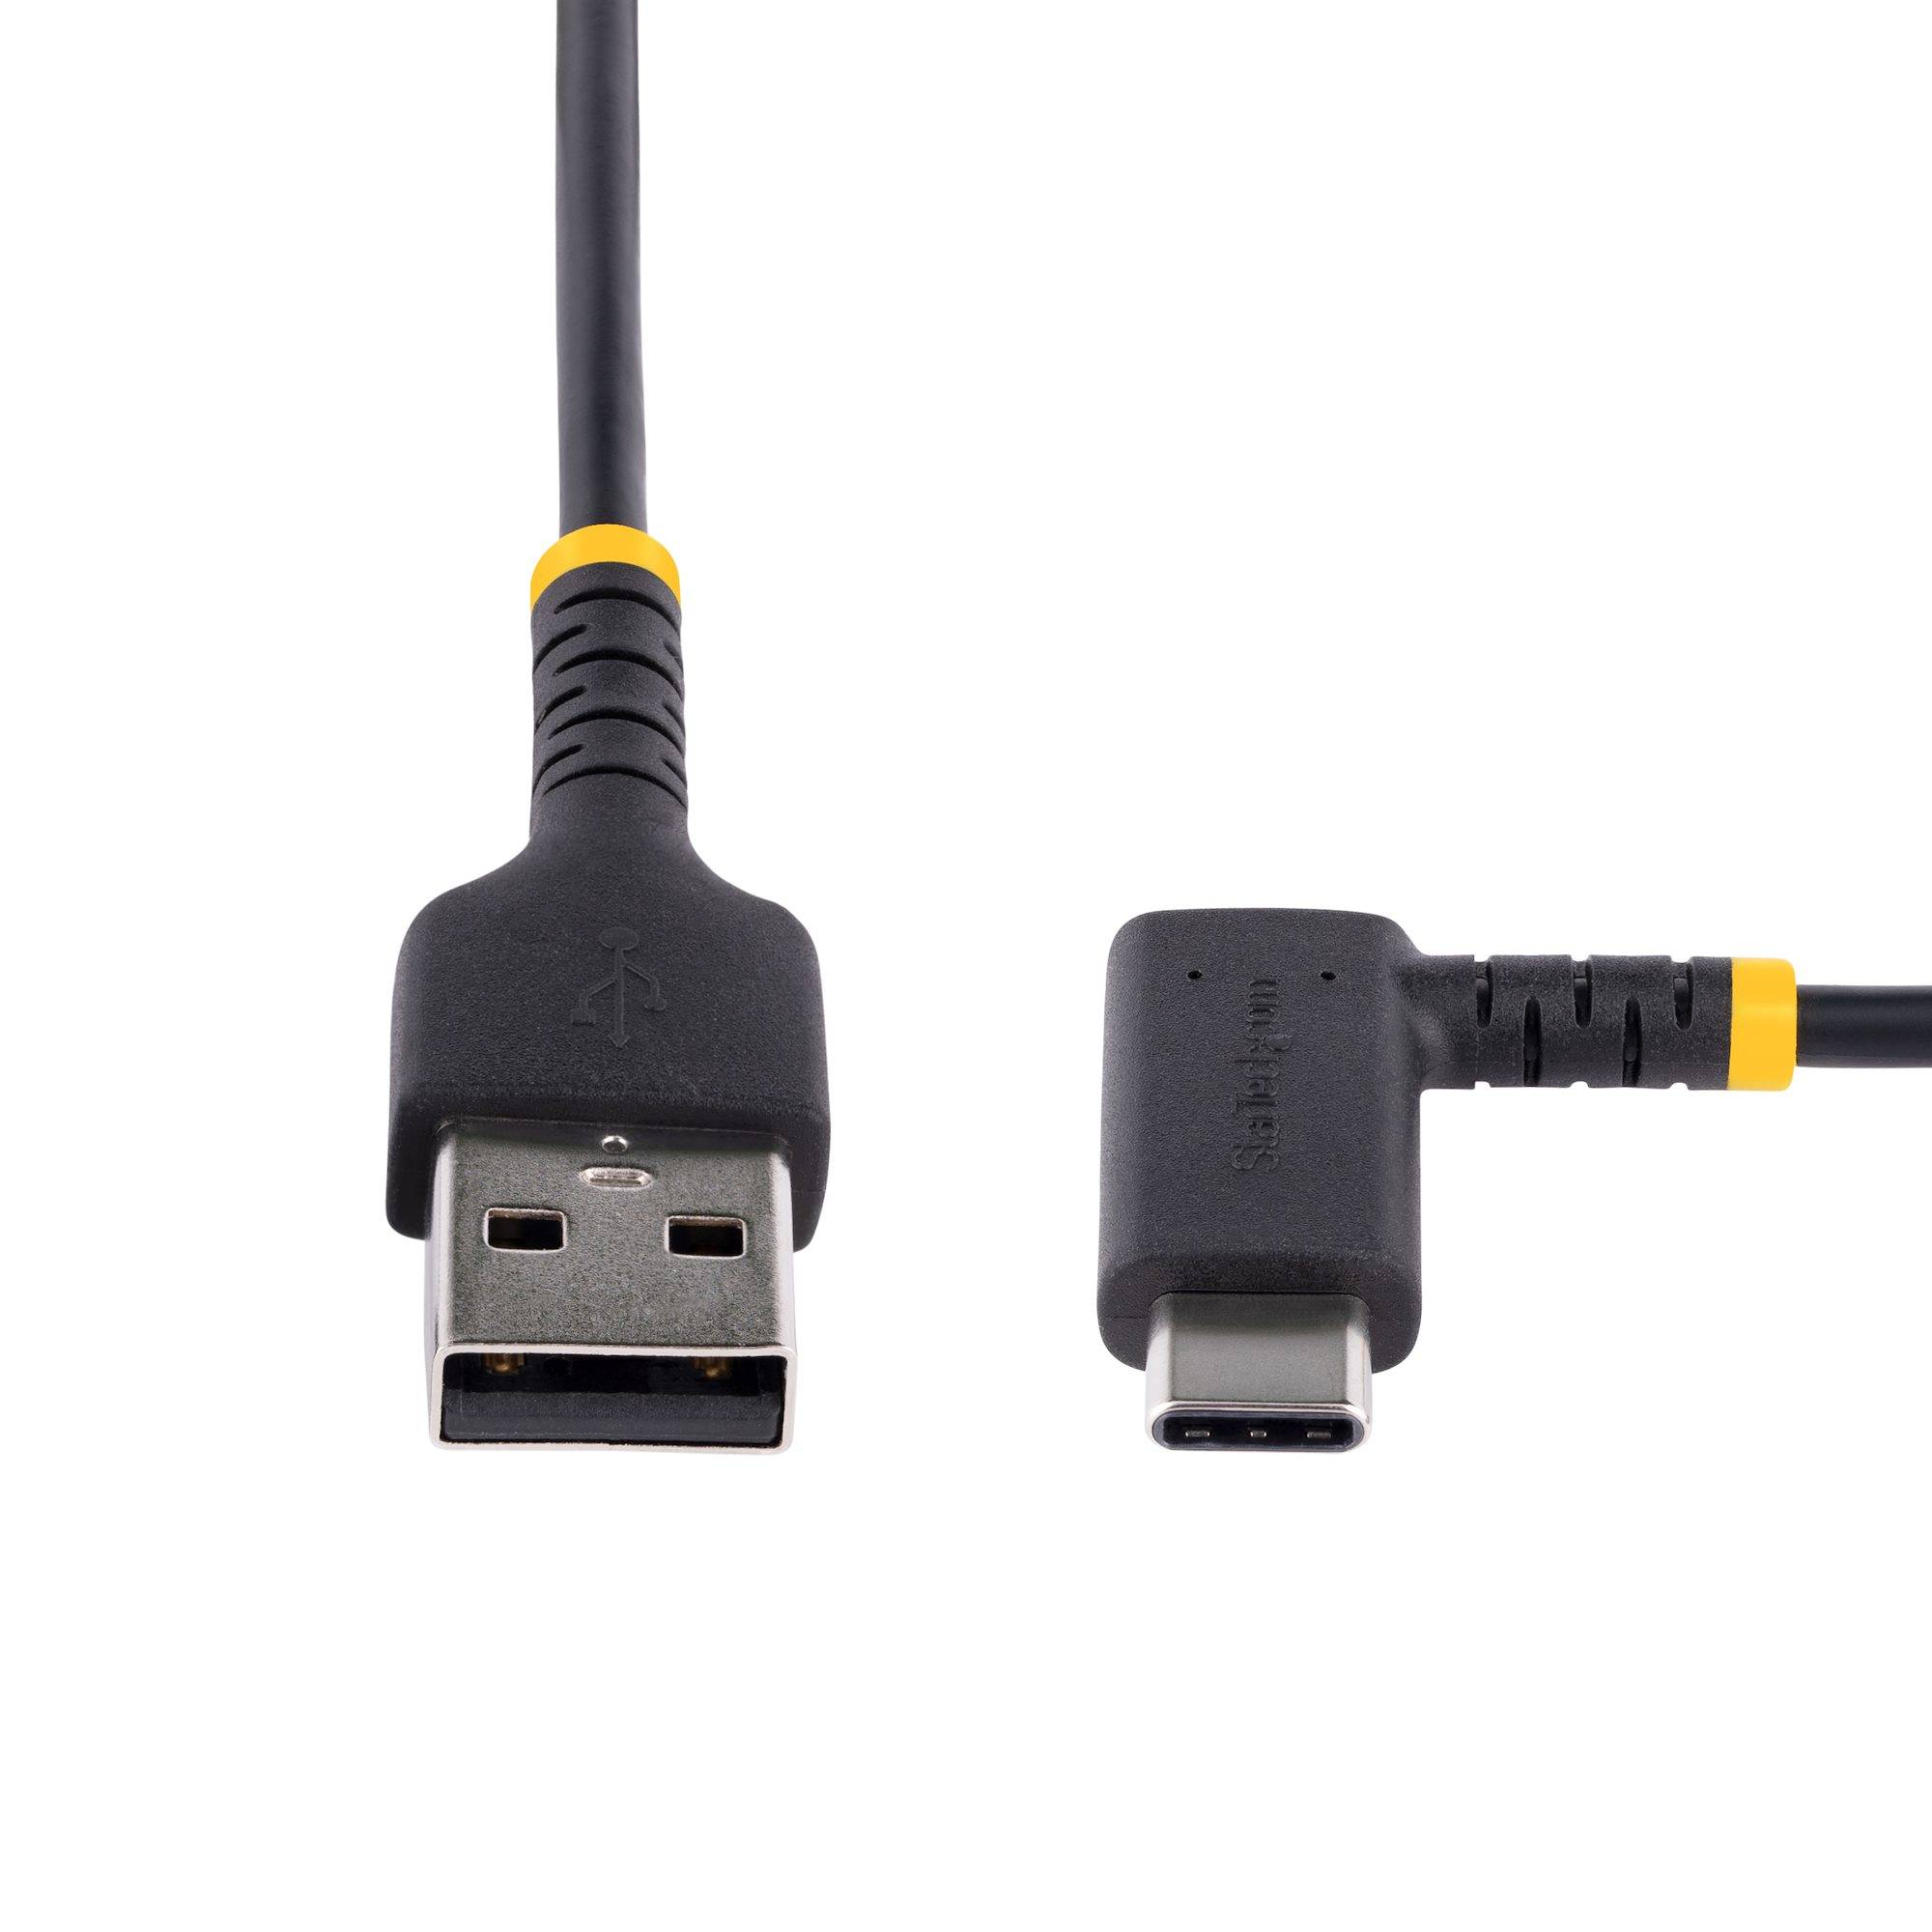 Rca Informatique - image du produit : USB-A TO USB-C CHARGING CABLE 1M RIGHT ANGLE - FAST CHARGE